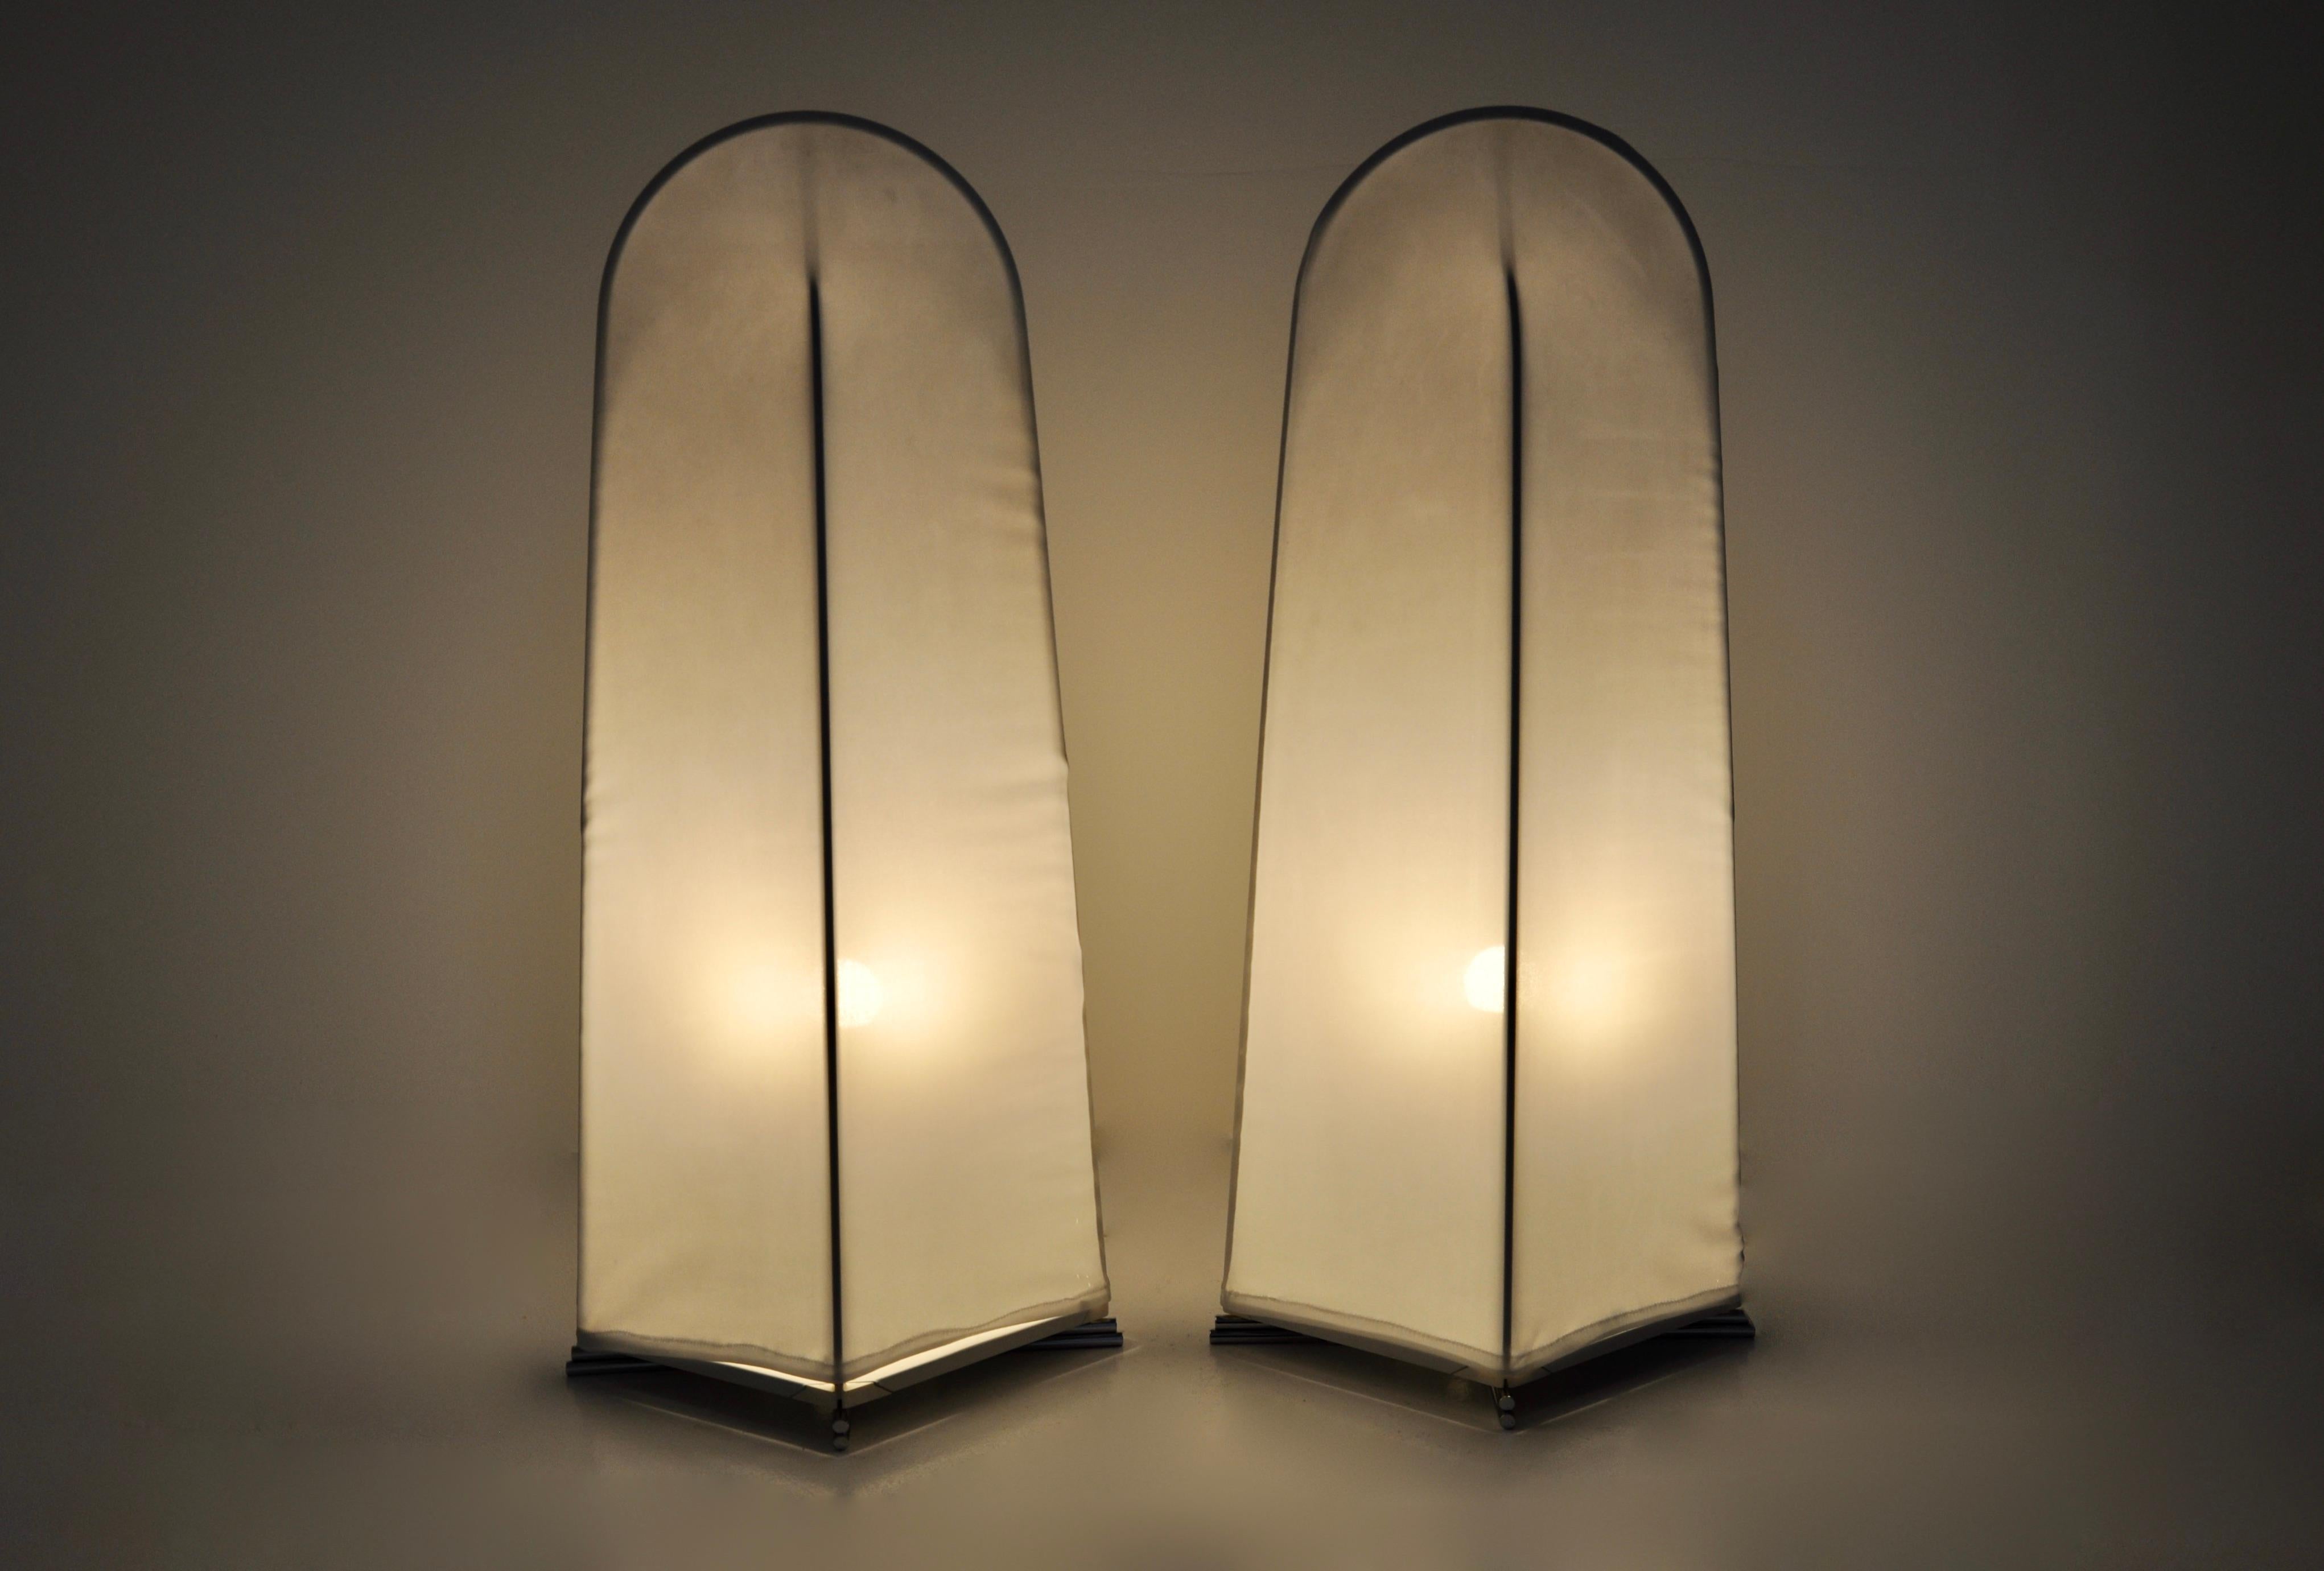 Set of 2 floor lamps by Kazuhide Tahama in fabric and metal. Model: Kazuki. Stamped on the underside. Wear due to time and age of the floor lamps.